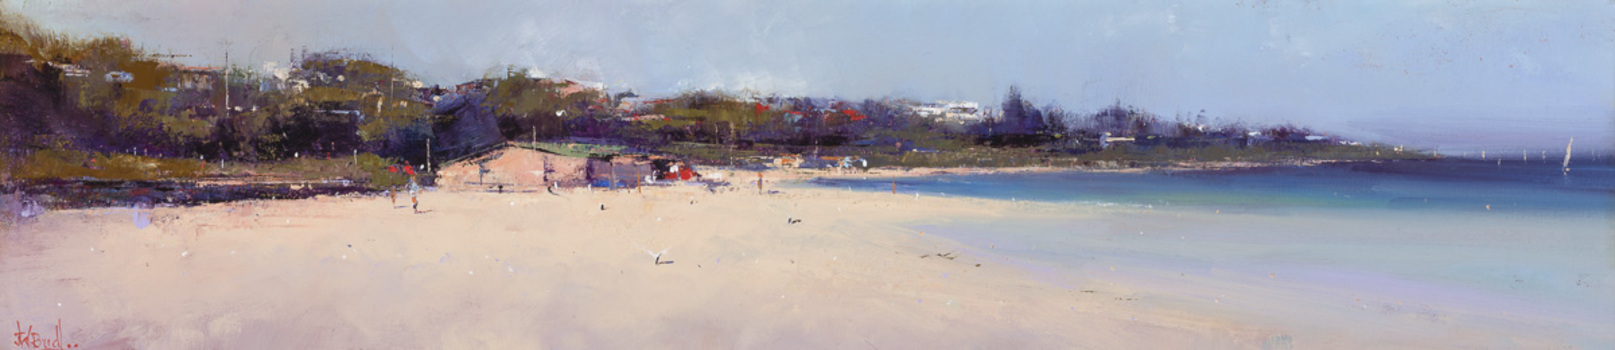 Panoramic painting of a beach scene with sand and shore line to the left and water to the right, in the centre there is a building and trees in the distance